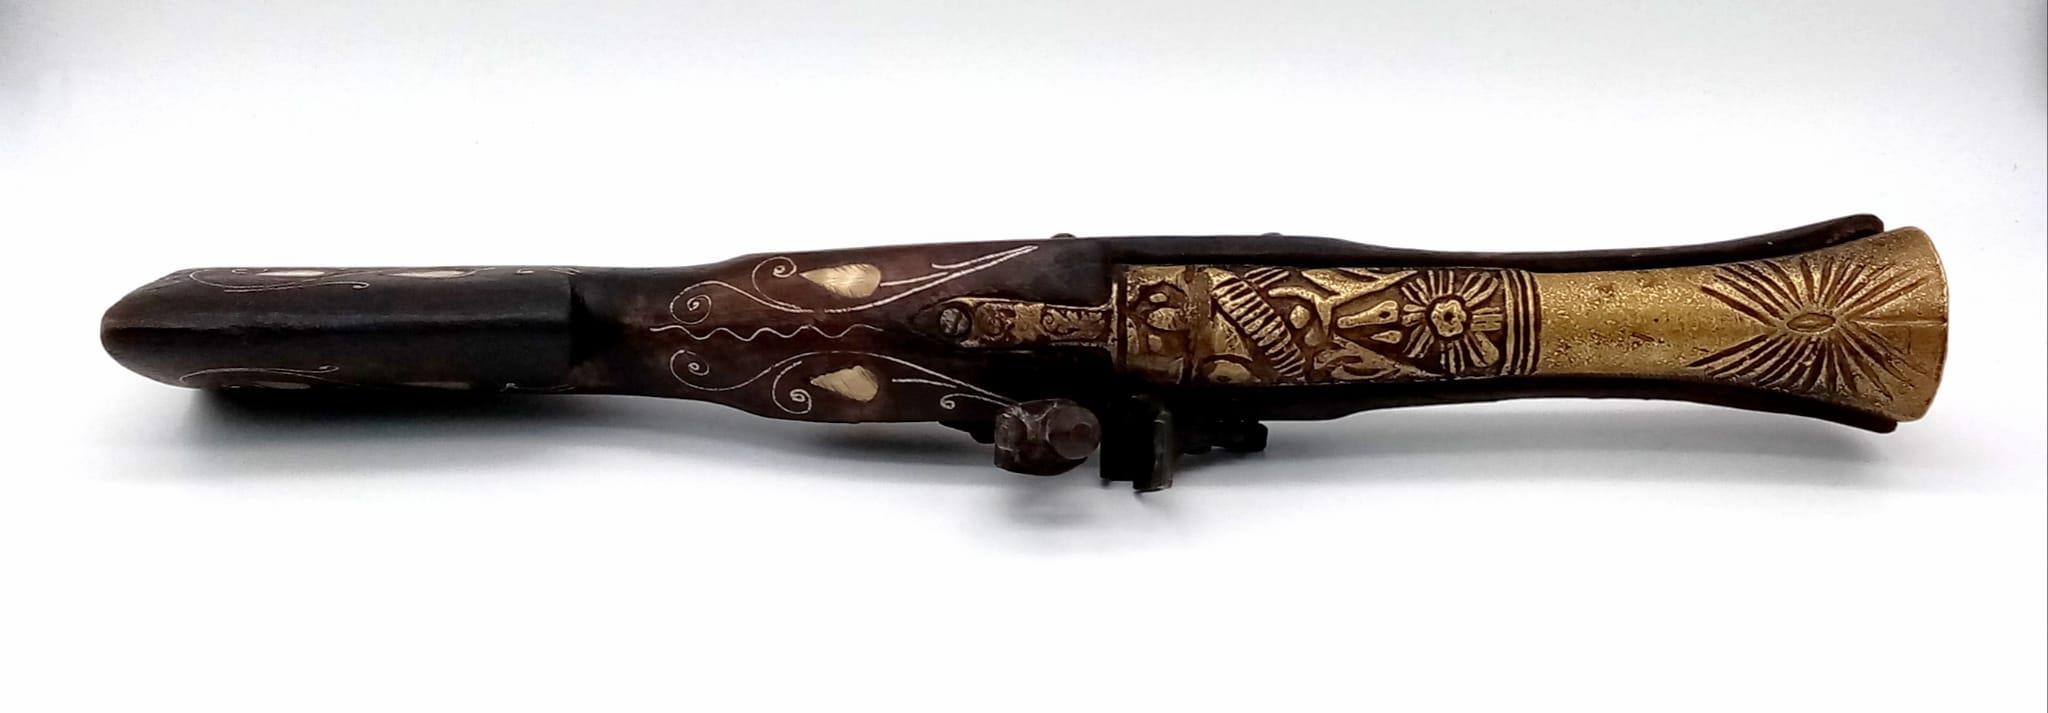 A Vintage Decorative Wood and Metal Eastern Blunderbuss Flintlock with Inlaid Mother of Pearl. - Image 2 of 4